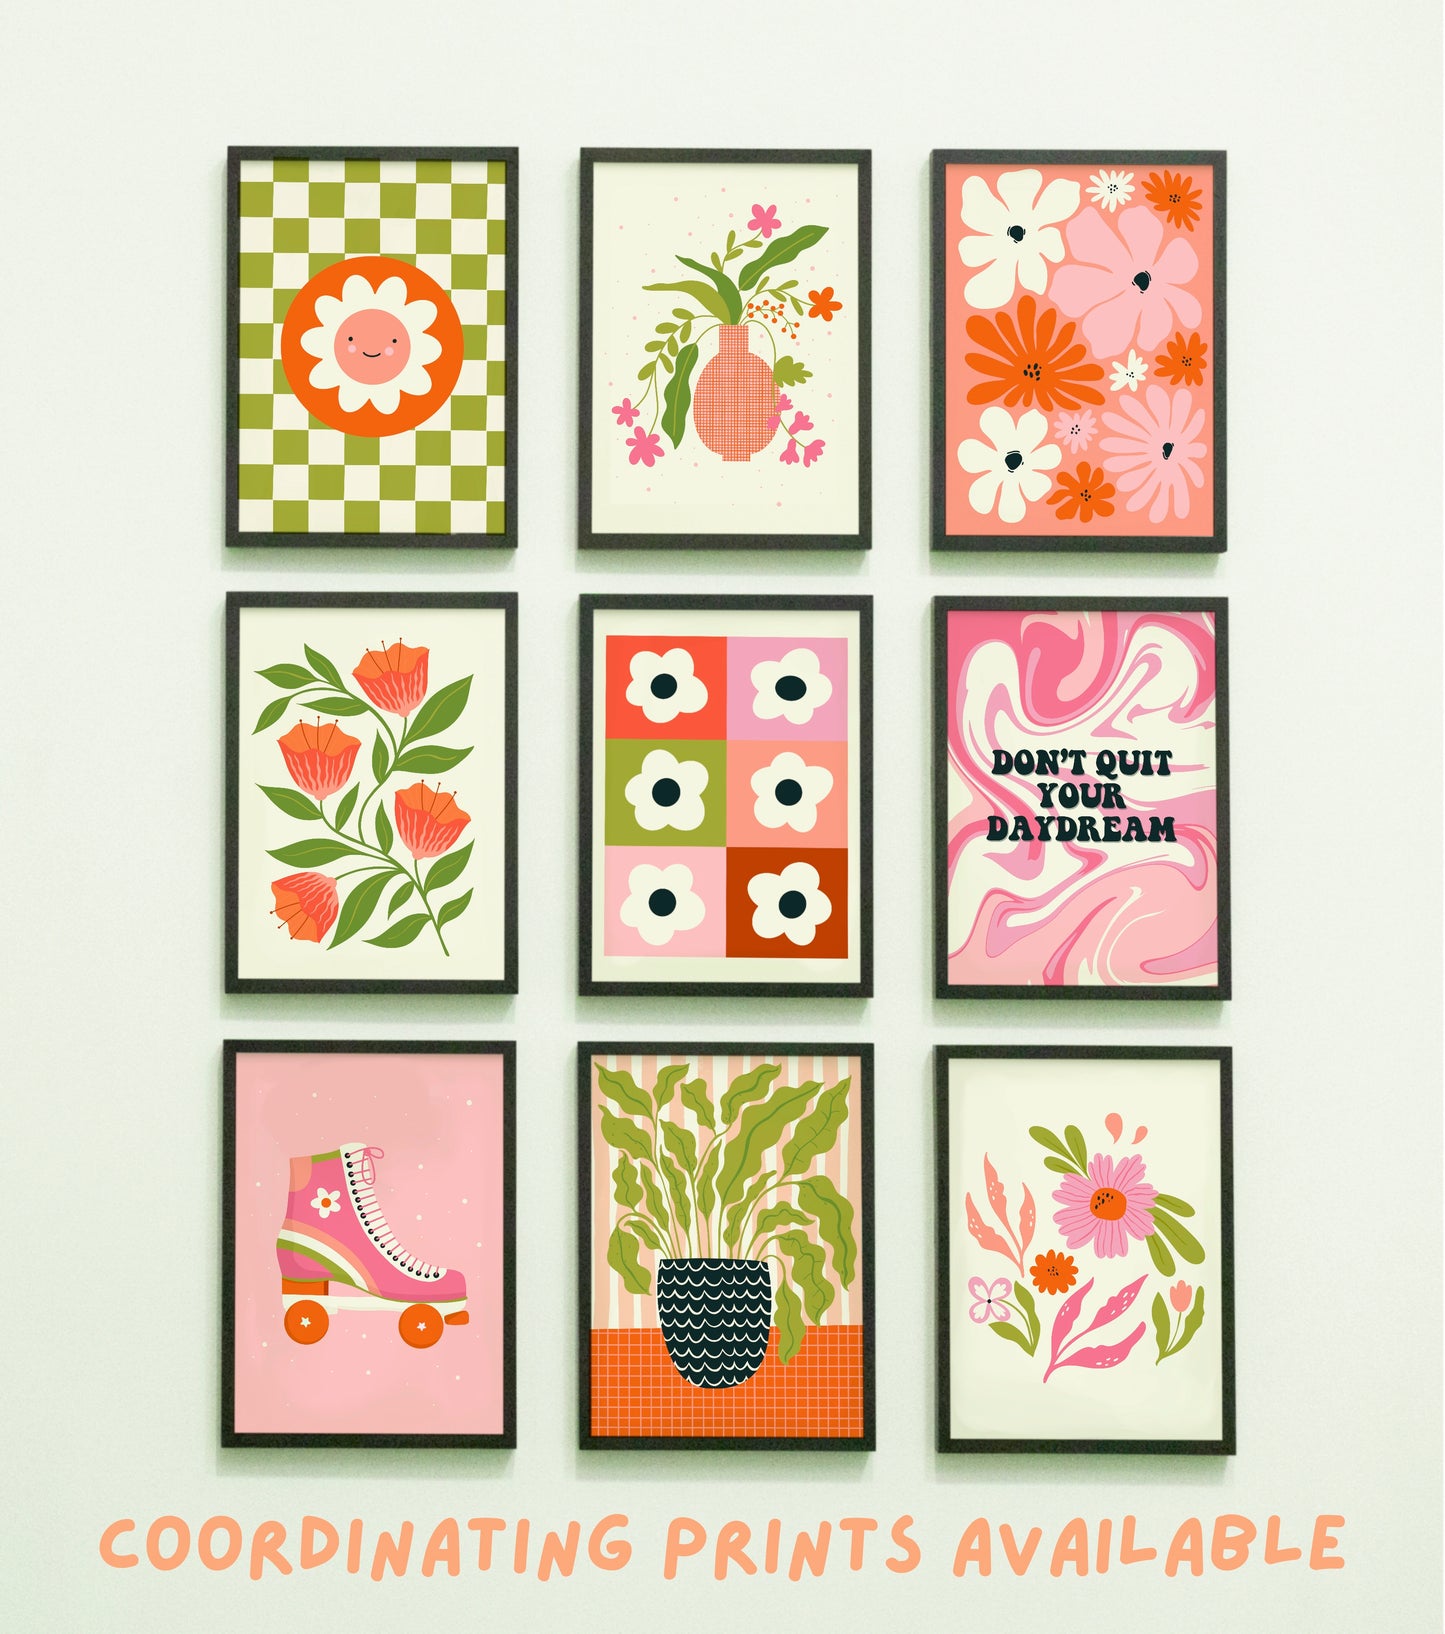 Retro Smiley Flower Print in Pink and Green